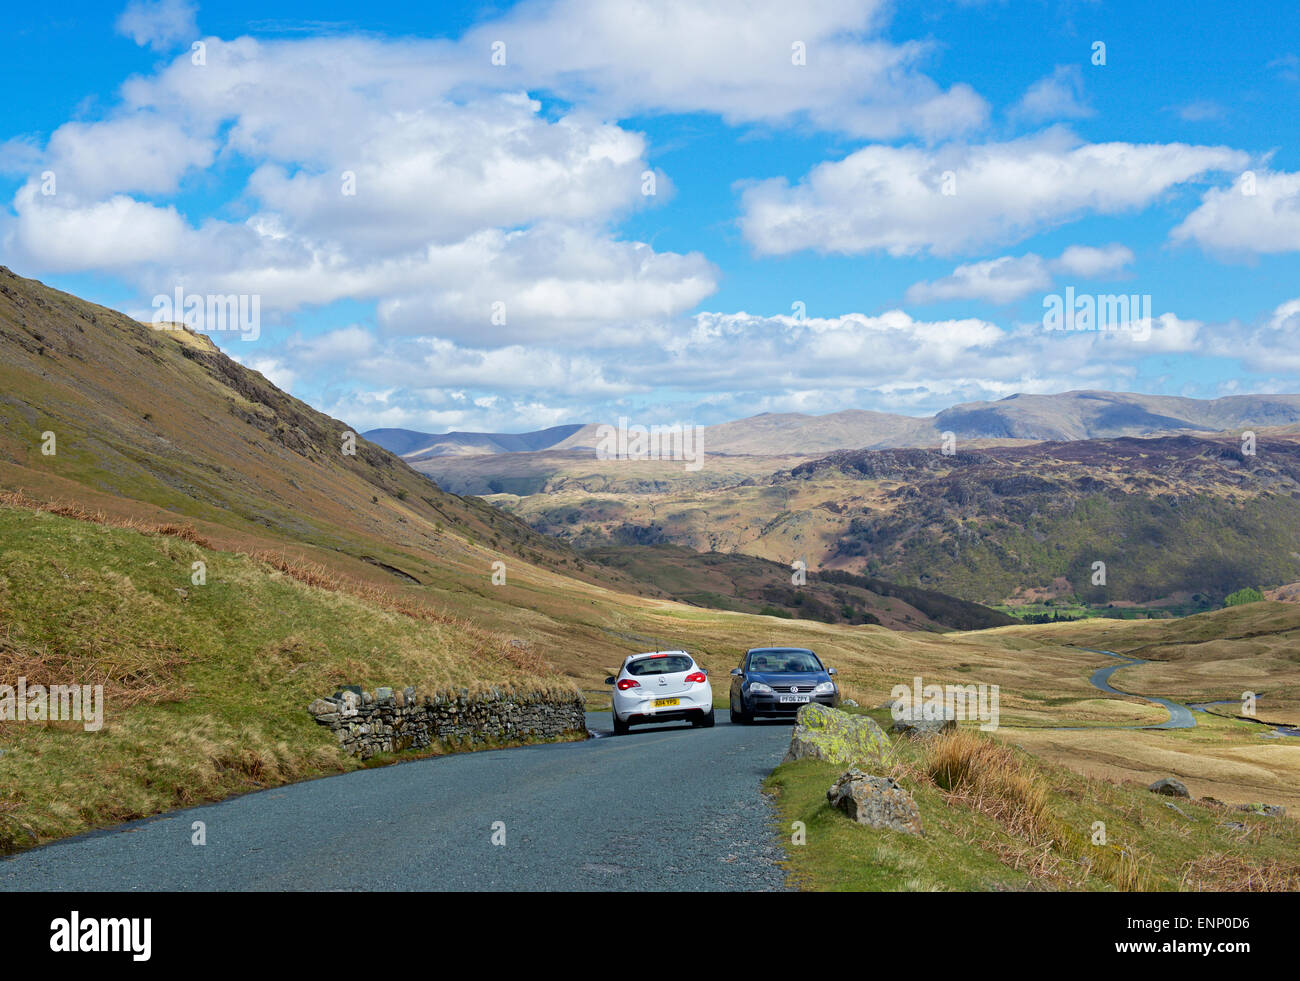 Two cars passing on the narrow Honister Pass (B5289), Lake District National Park, Cumbria, England UK Stock Photo